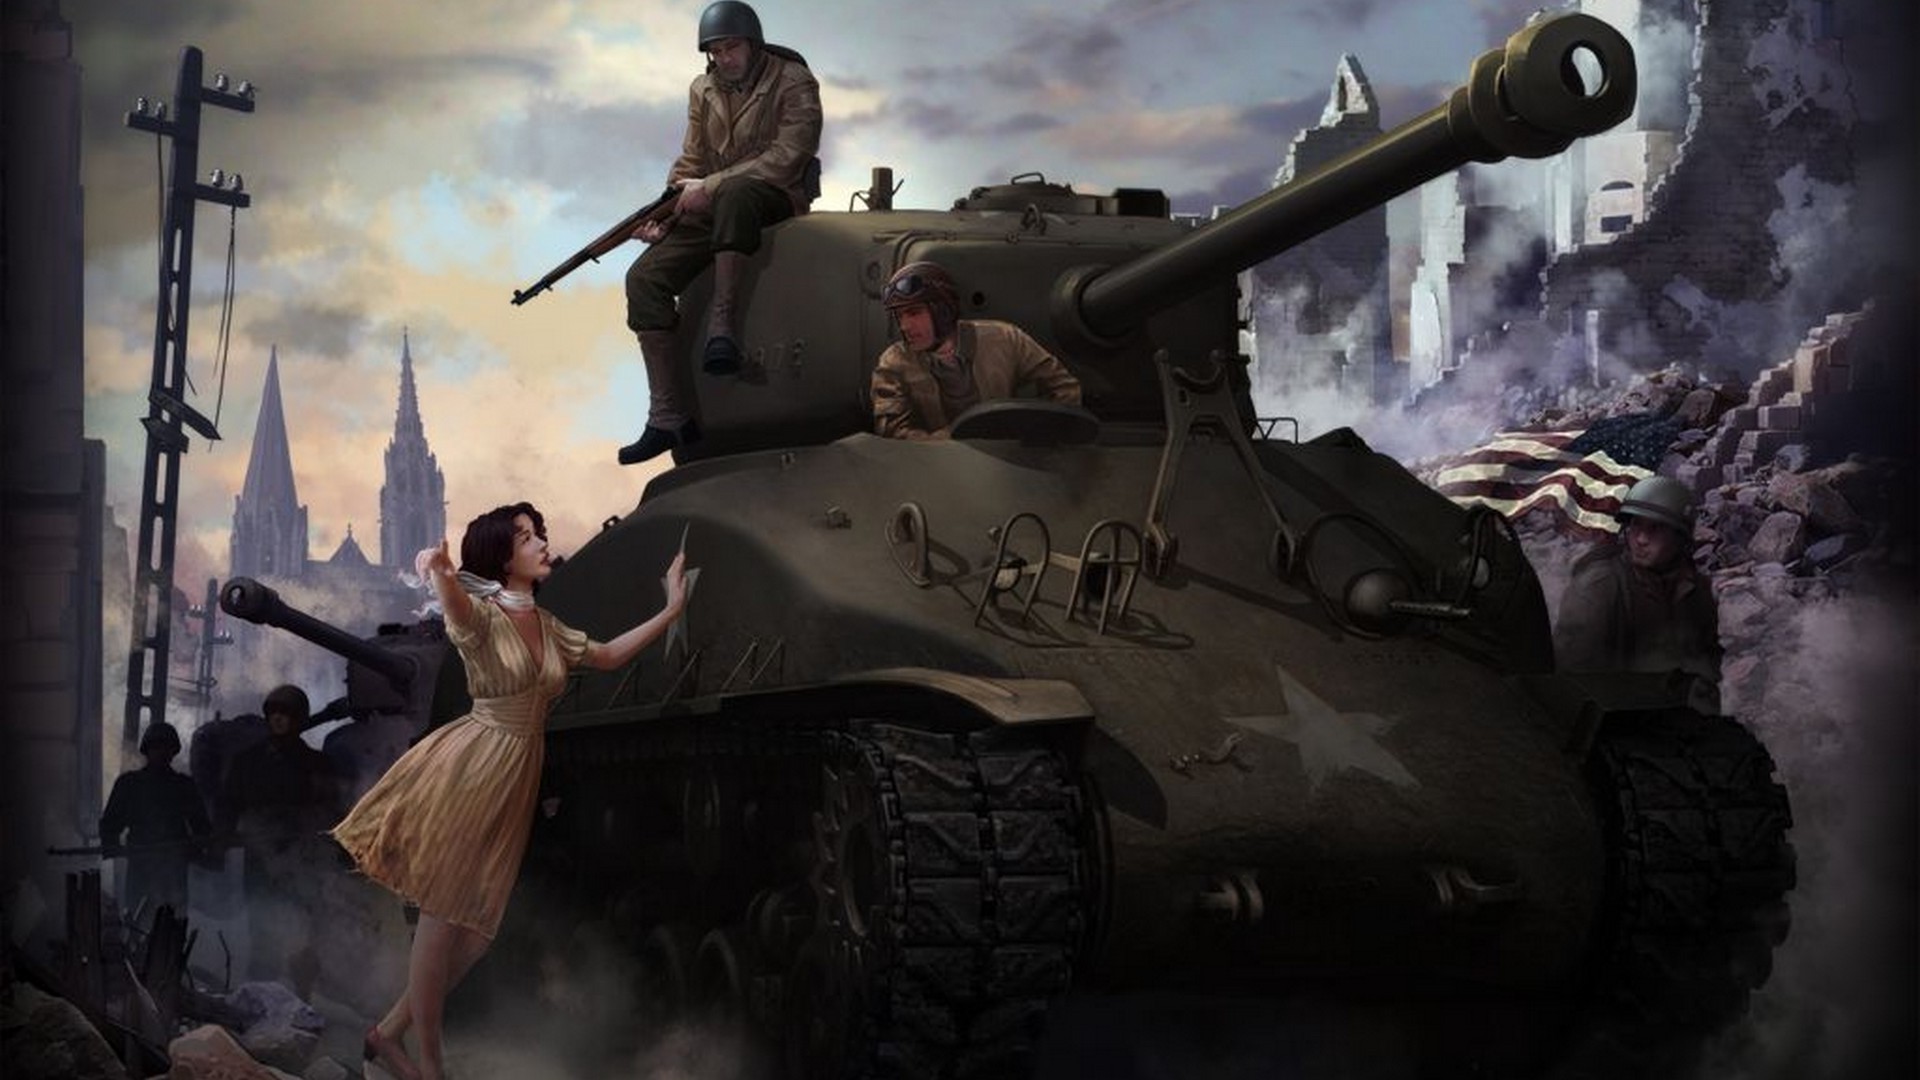 1920x1080 undefined World Of Tanks Wallpaper (30 Wallpapers) | Adorable Wallpapers